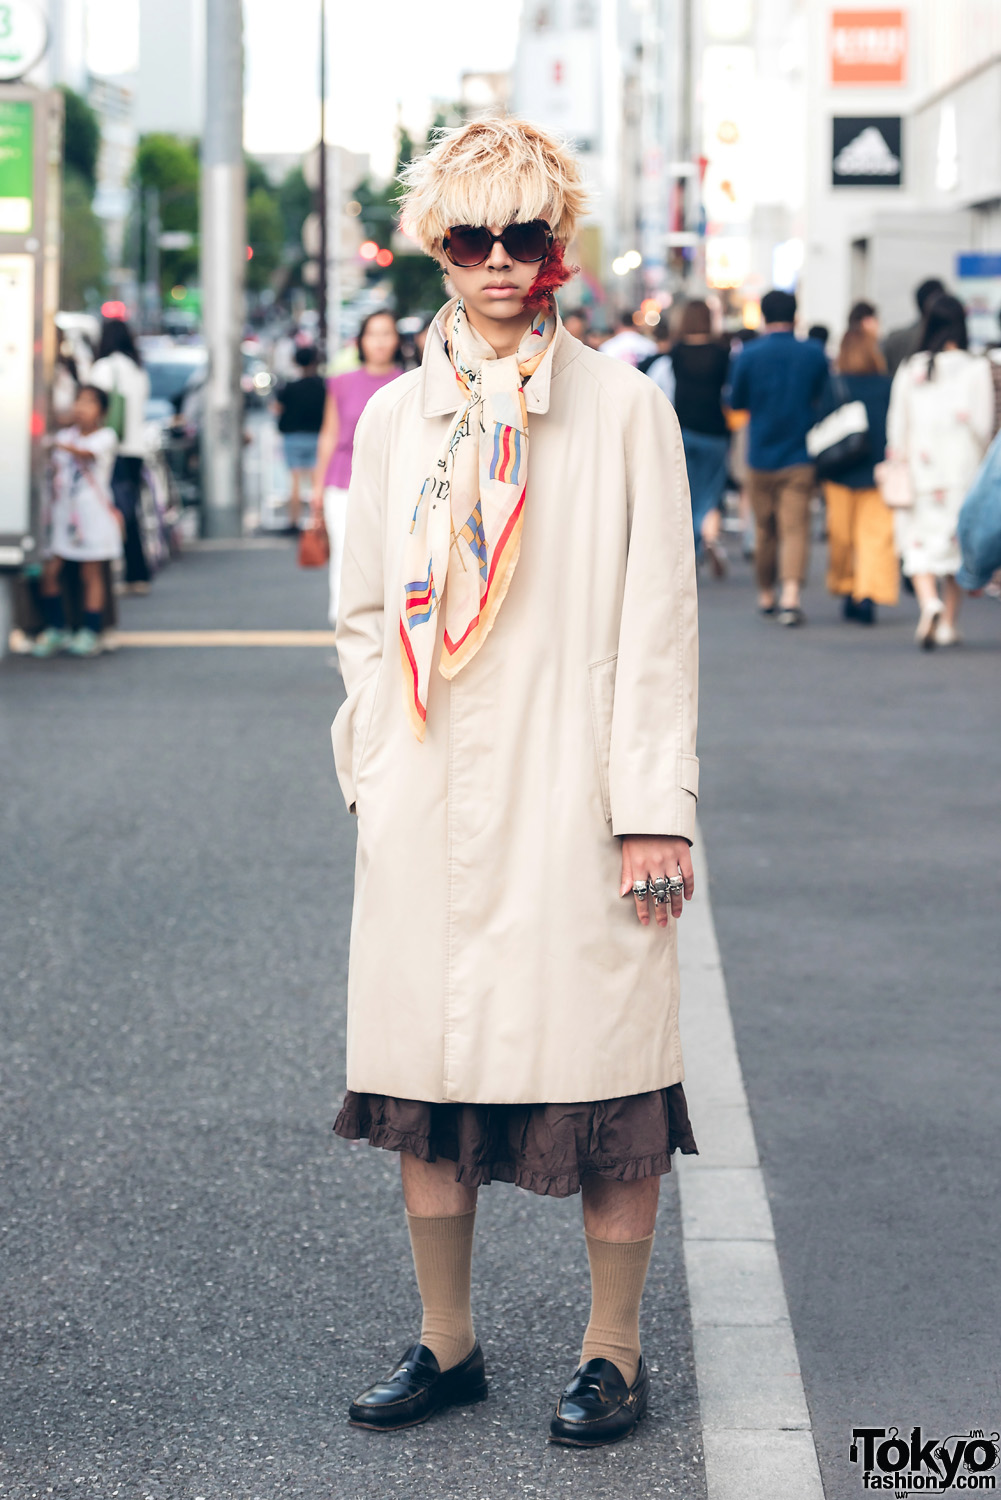 Harajuku Guy in Skirt Street Style w/ Burberry, Tokyo Human Experiments & Pfiff Feather Face Makeup